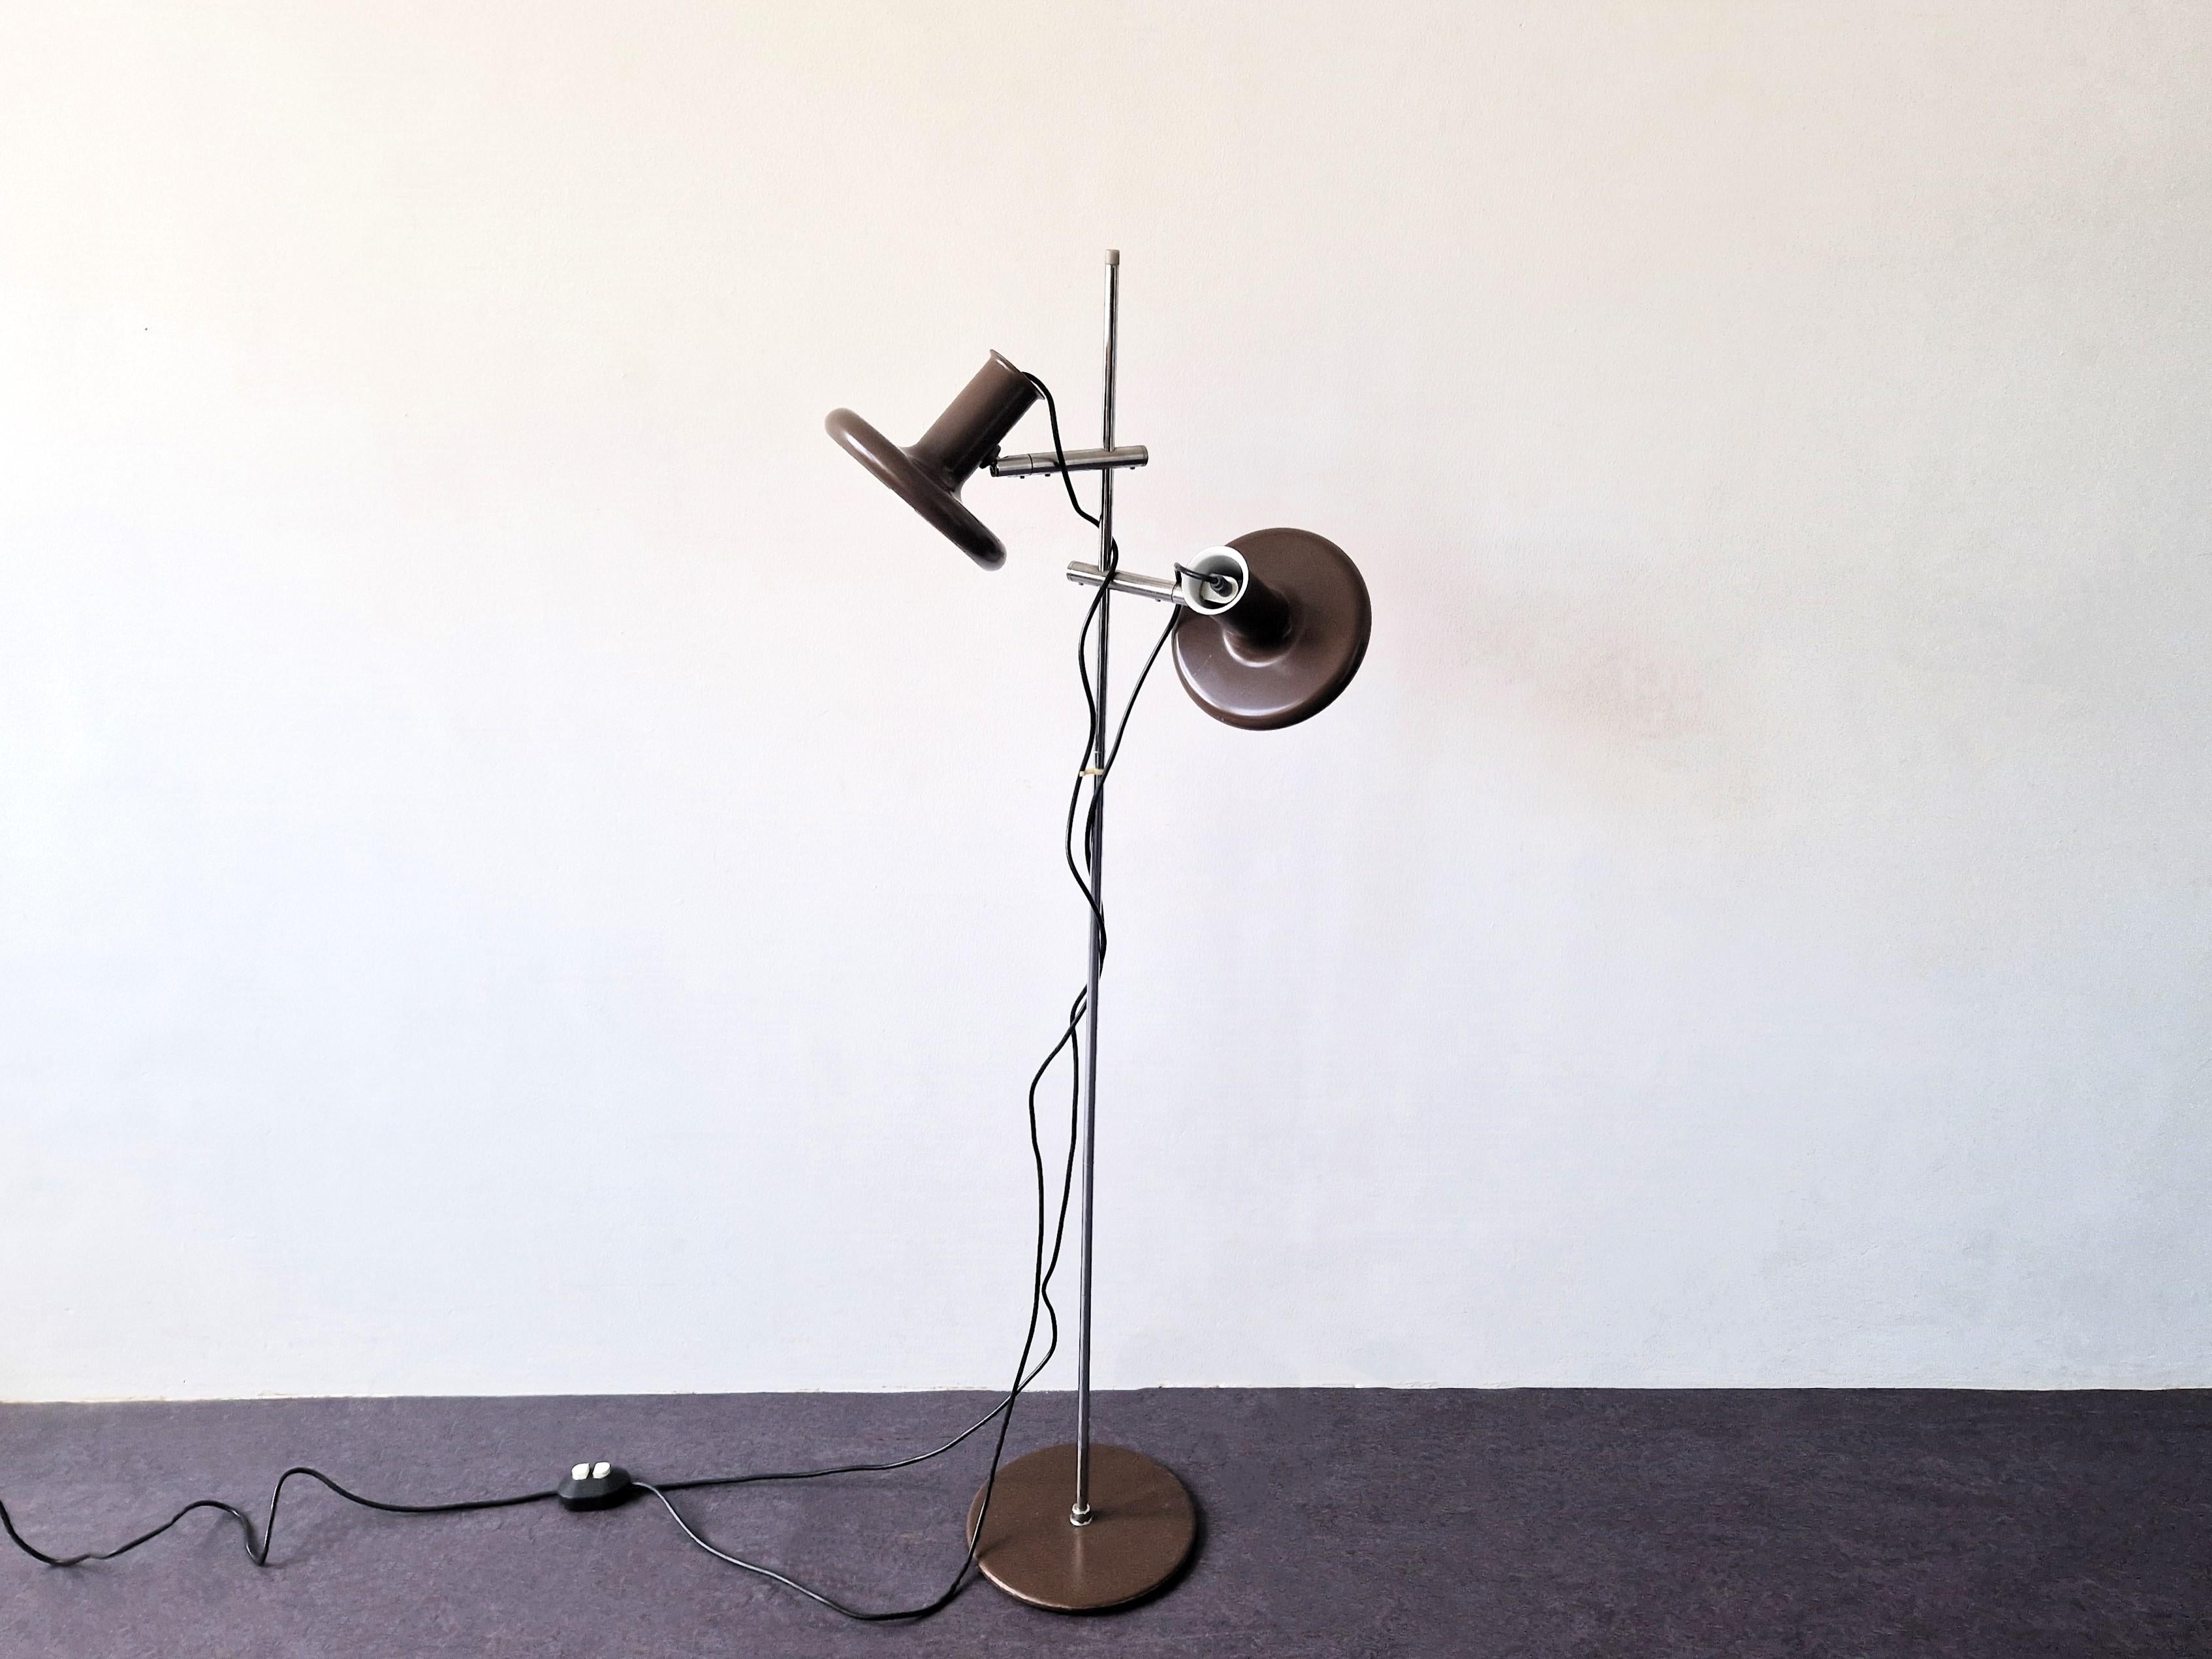 This dark brown 'Optima 4' floor lamp was designed in 1972 by Hans Due for Fog and Mørup in Denmark. The lamp has 2 adjustable shades and a well-functioning original foot switch, which can operate both lamps separately. This floor lamp is labelled